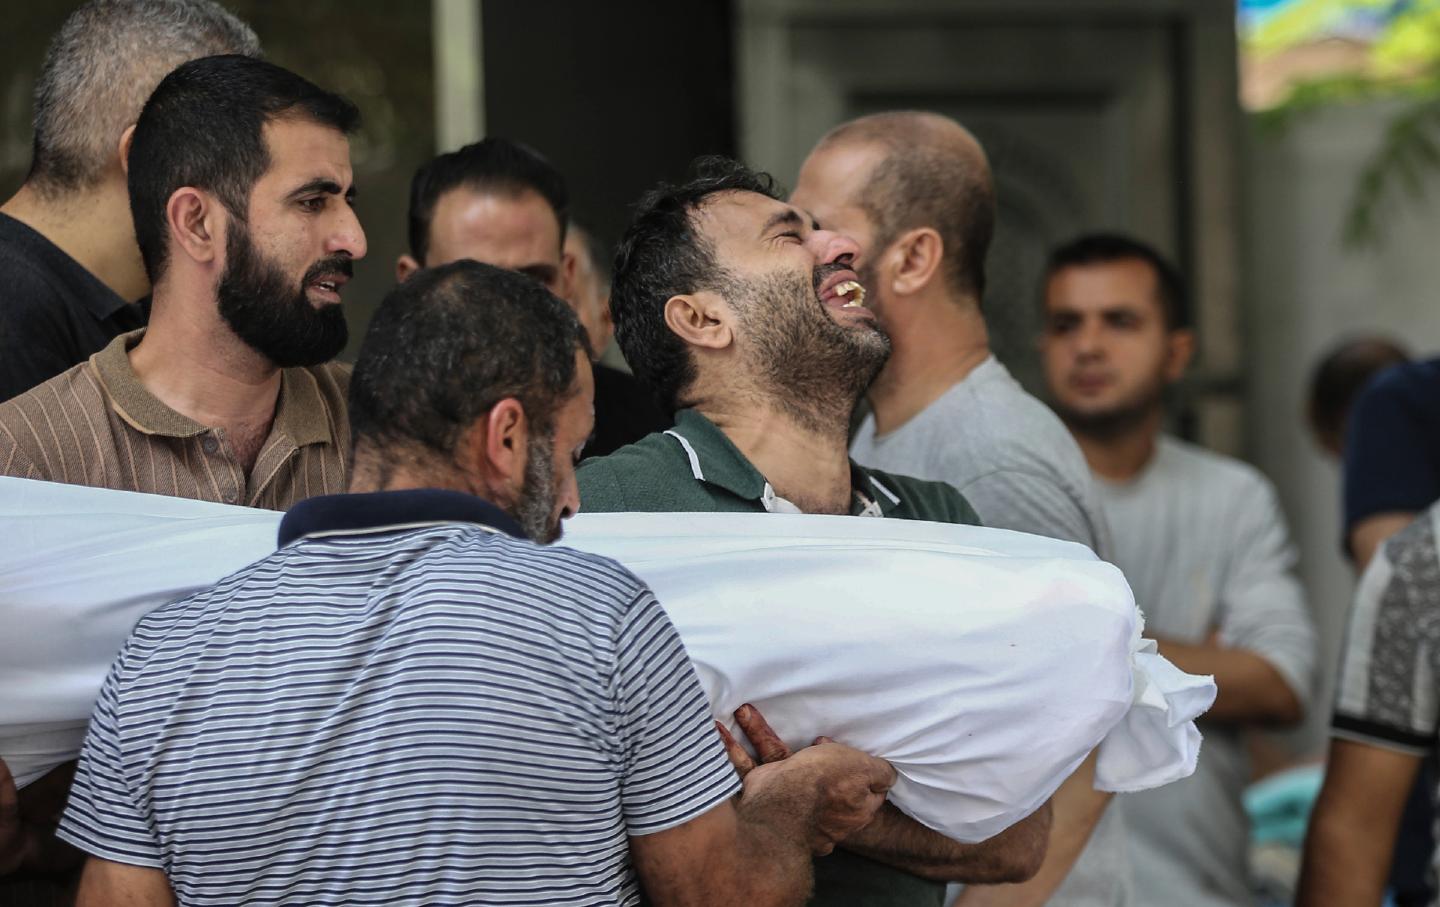 Ooutside the morgue of al-Shifa hospital in Gaza City, a Palestinian man weeps while carrying the body of one of the victims killed by Israeli air strikes.